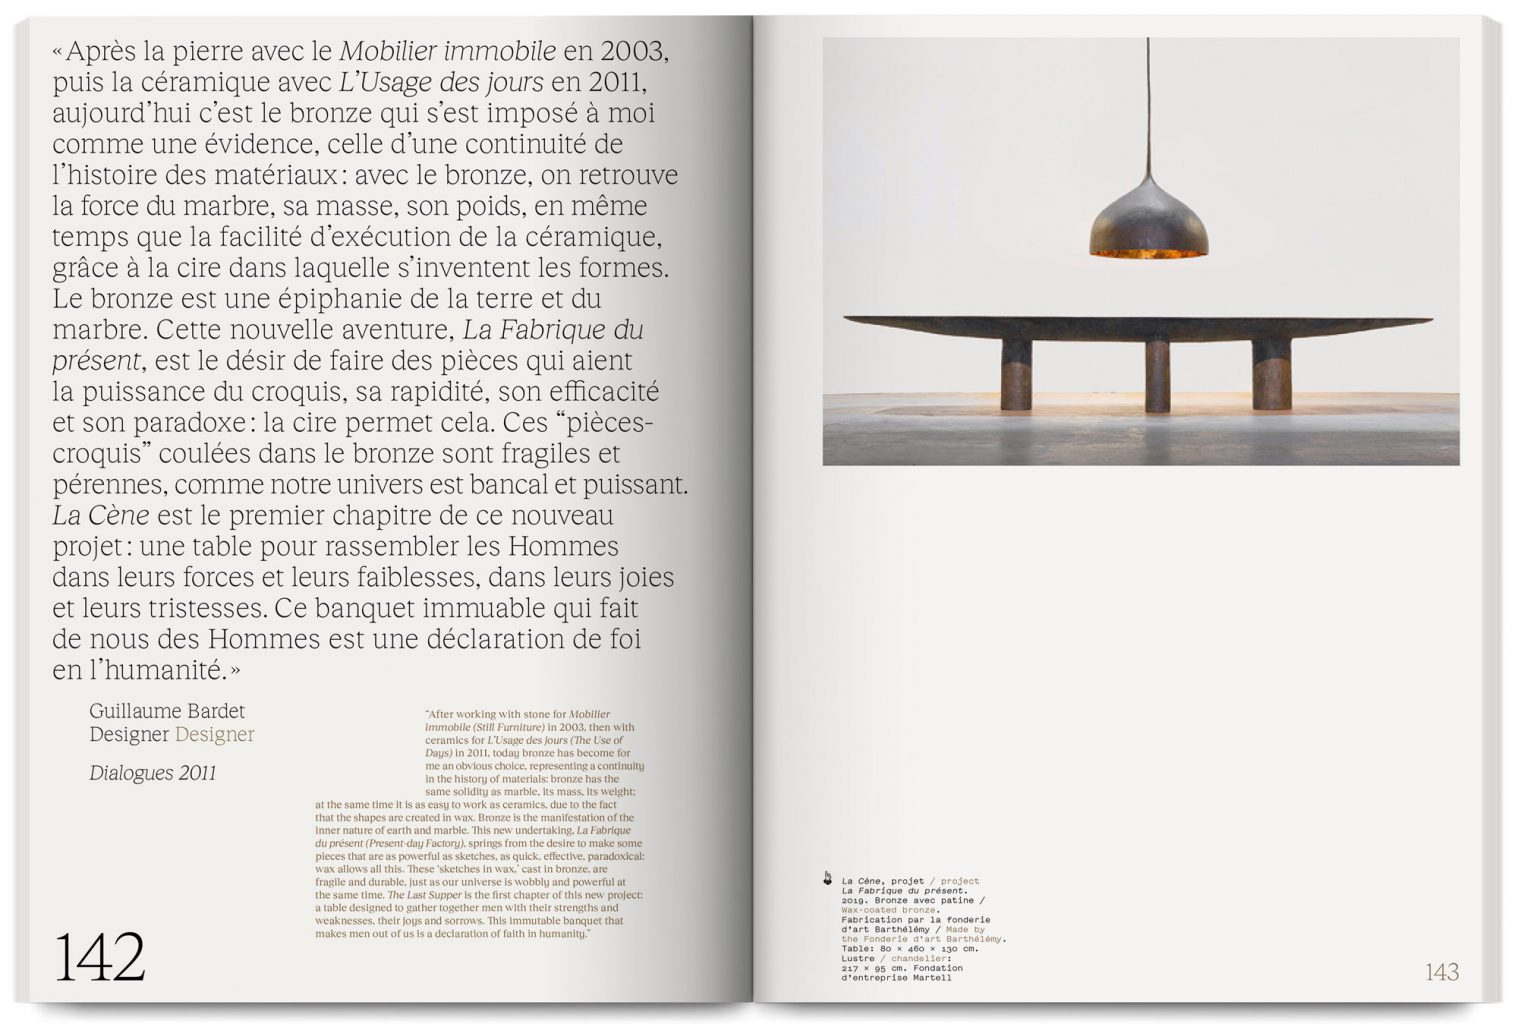 Exhibition catalogue L’esprit commence et finit avec les mains at the Palais de Tokyo published by Flammarion, designed by In the shade of a tree studio, founded by Sophie Demay and Maël Fournier Comte.